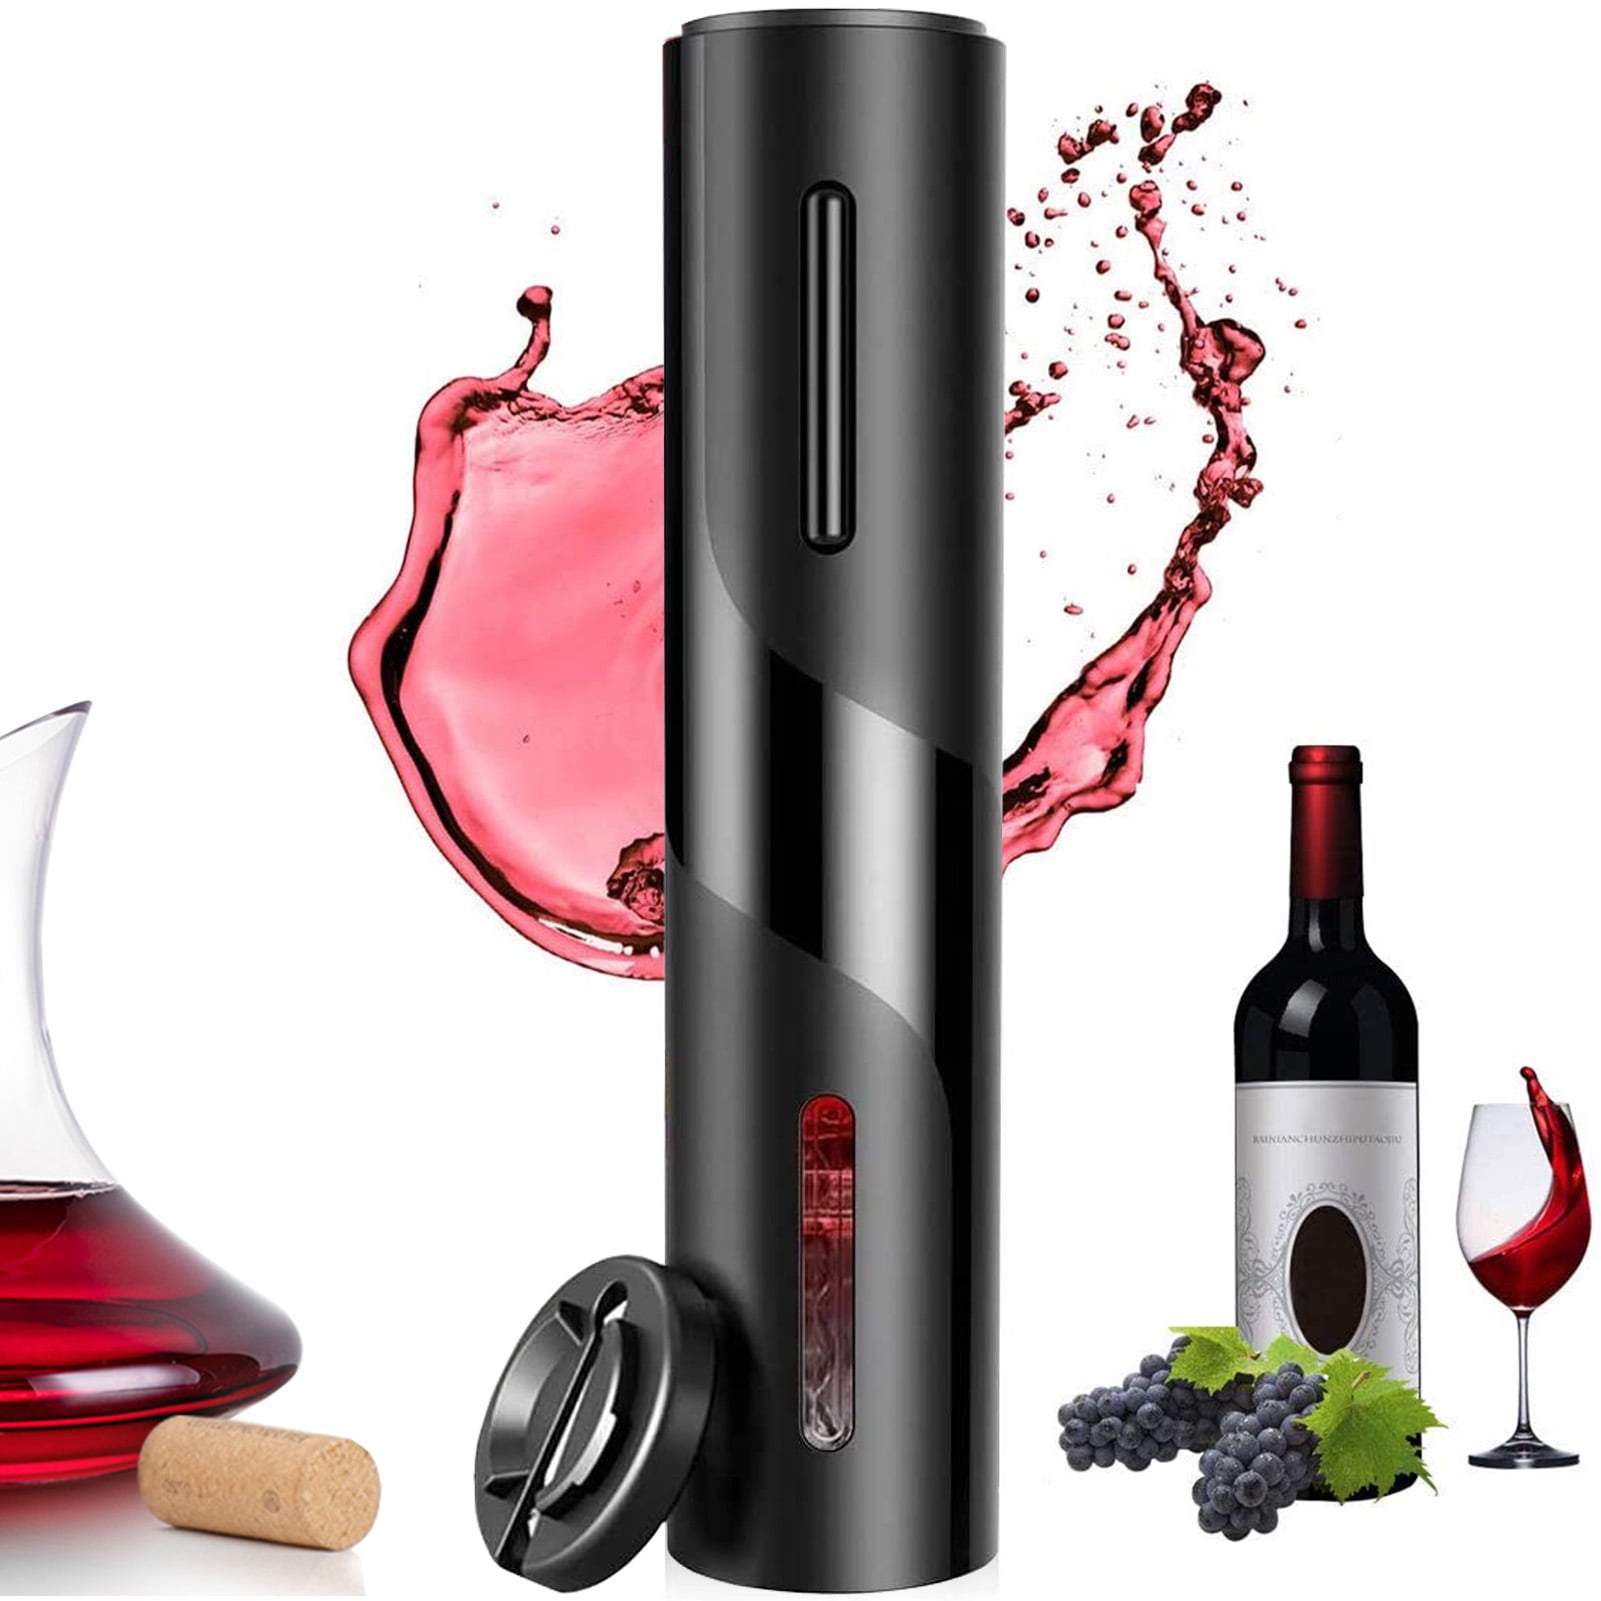 Swiss Crafts Rechargeable Electric Wine Opener Cordless Battery Powered Wine Bottle Opener BLACK